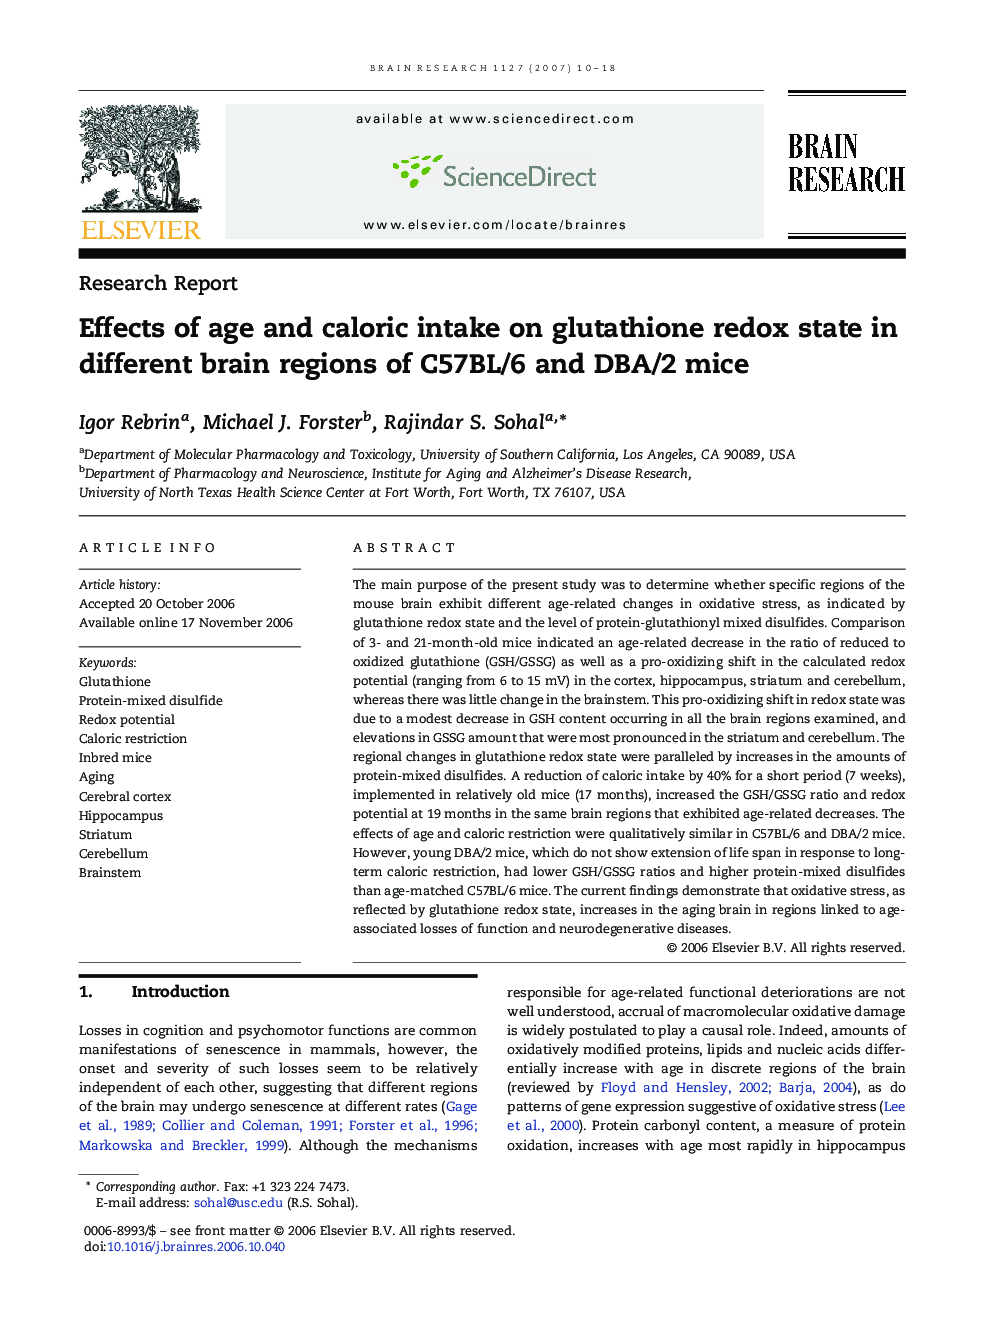 Effects of age and caloric intake on glutathione redox state in different brain regions of C57BL/6 and DBA/2 mice